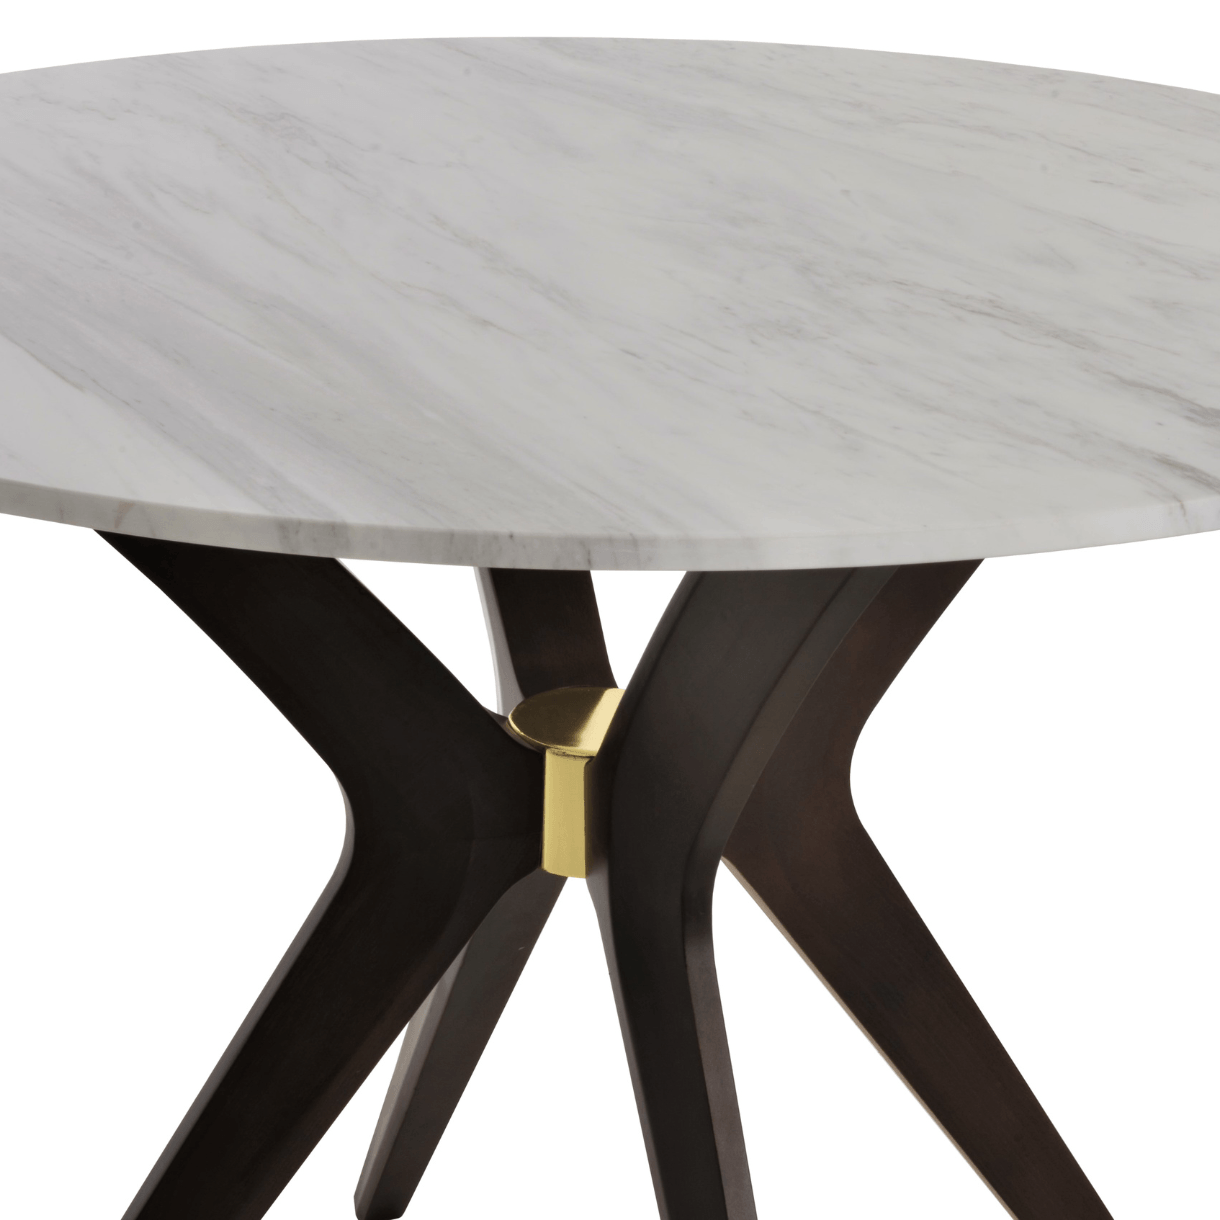 Round Table Pavilion Marble Table Top - Your Bar Stools Canada